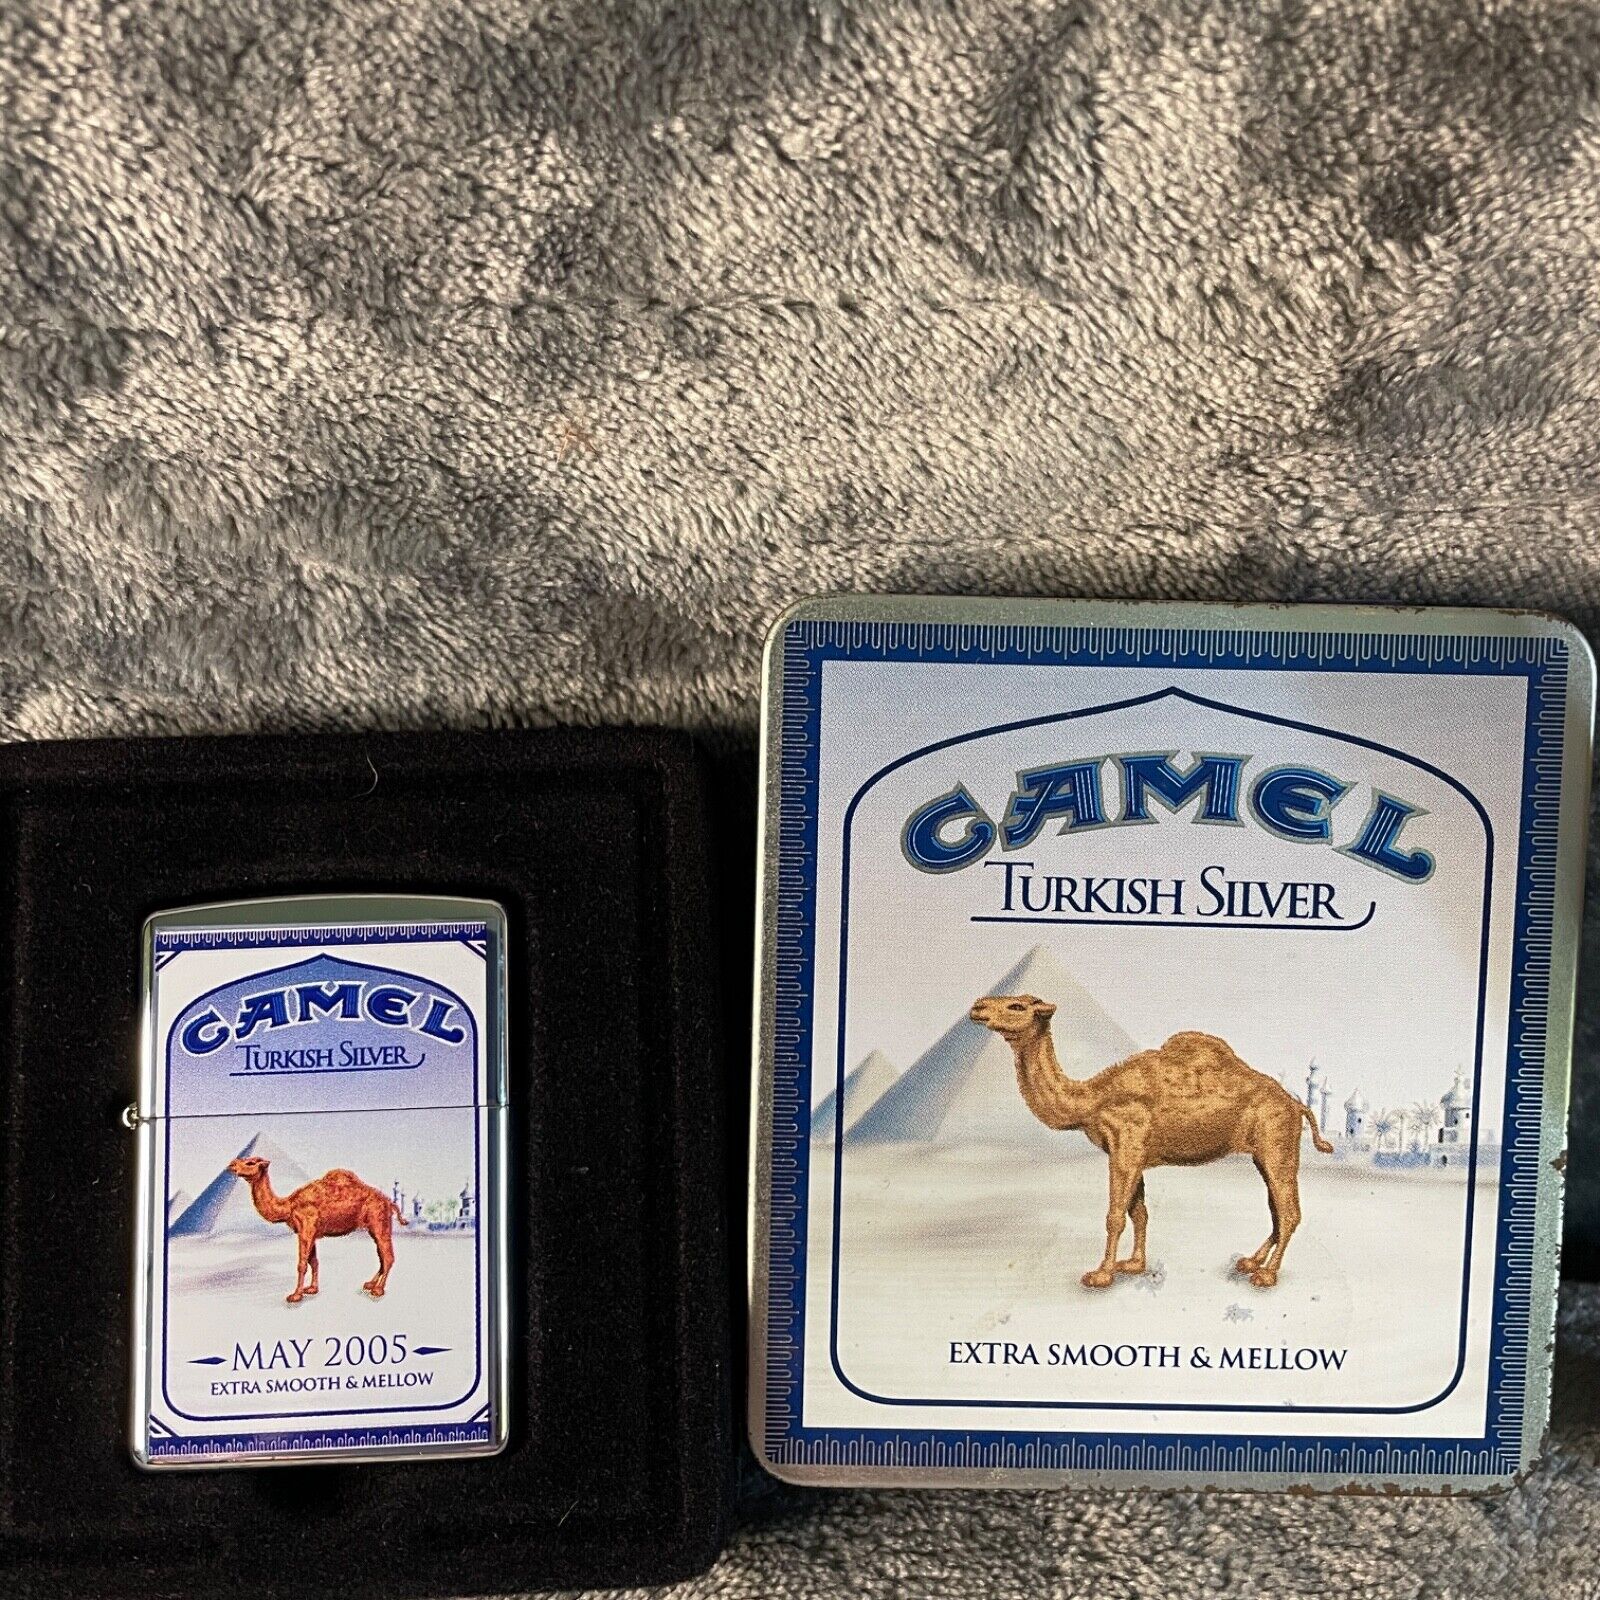 Camel Zippo MAY 2005 Turkish Silver Lighter and box. For RJR Sales Force